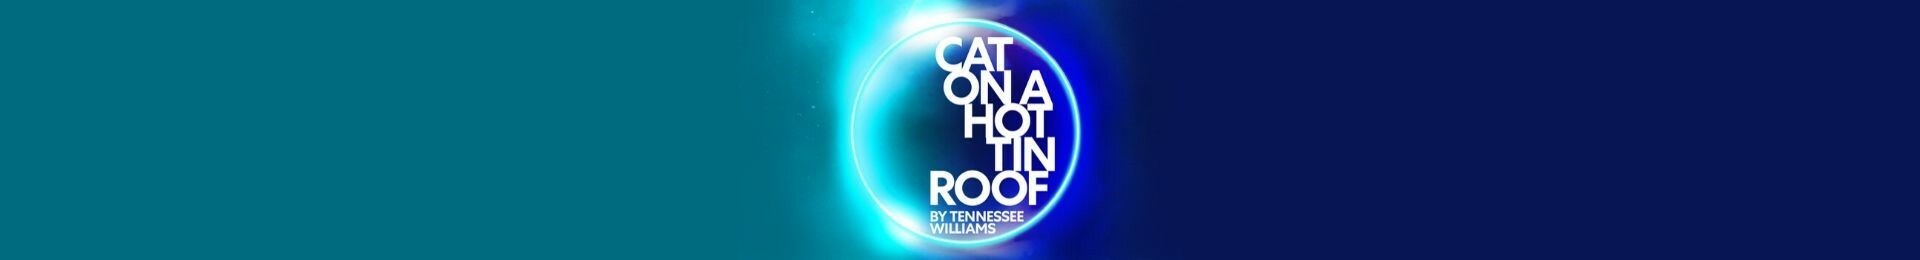 Cat On A Hot Tin Roof banner image